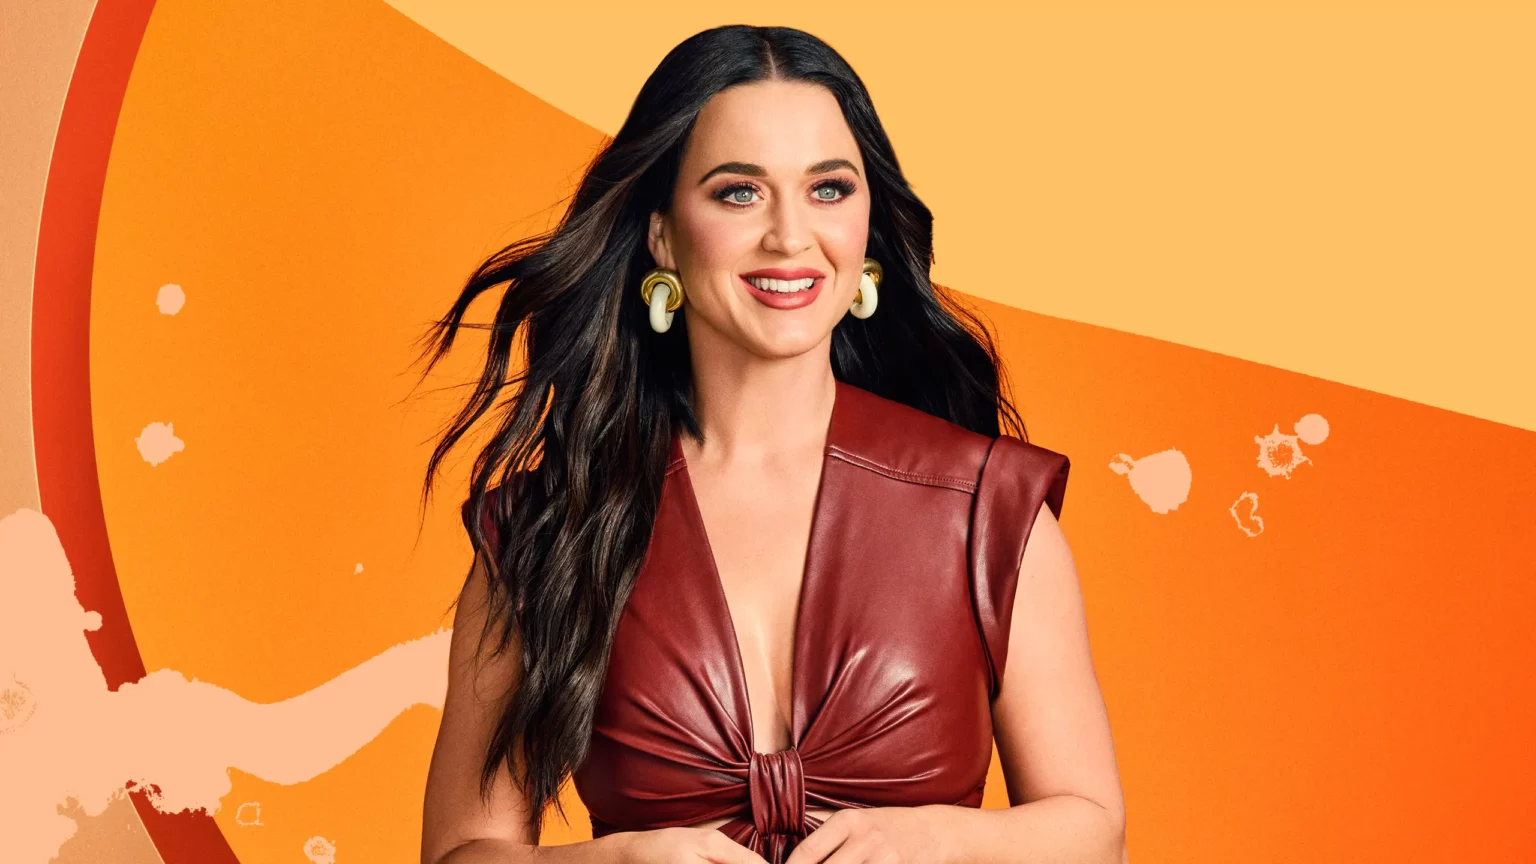 katy-perry-contemplating-departure-from-american-idol-amidst-backlash